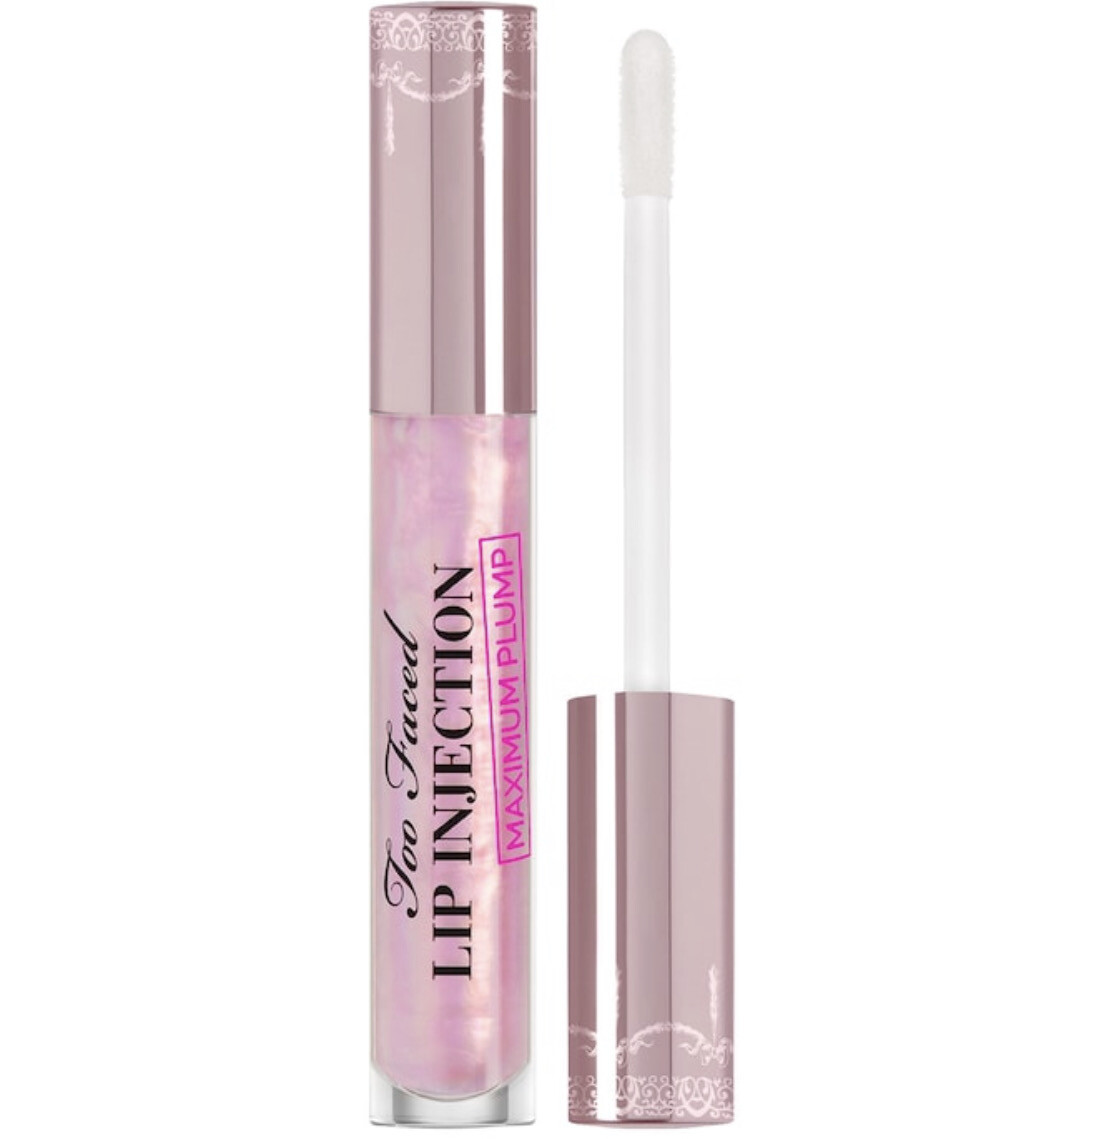 Too Faced - Lip Injection Maximum Plump Extra Strength Lip Plumper | Clear